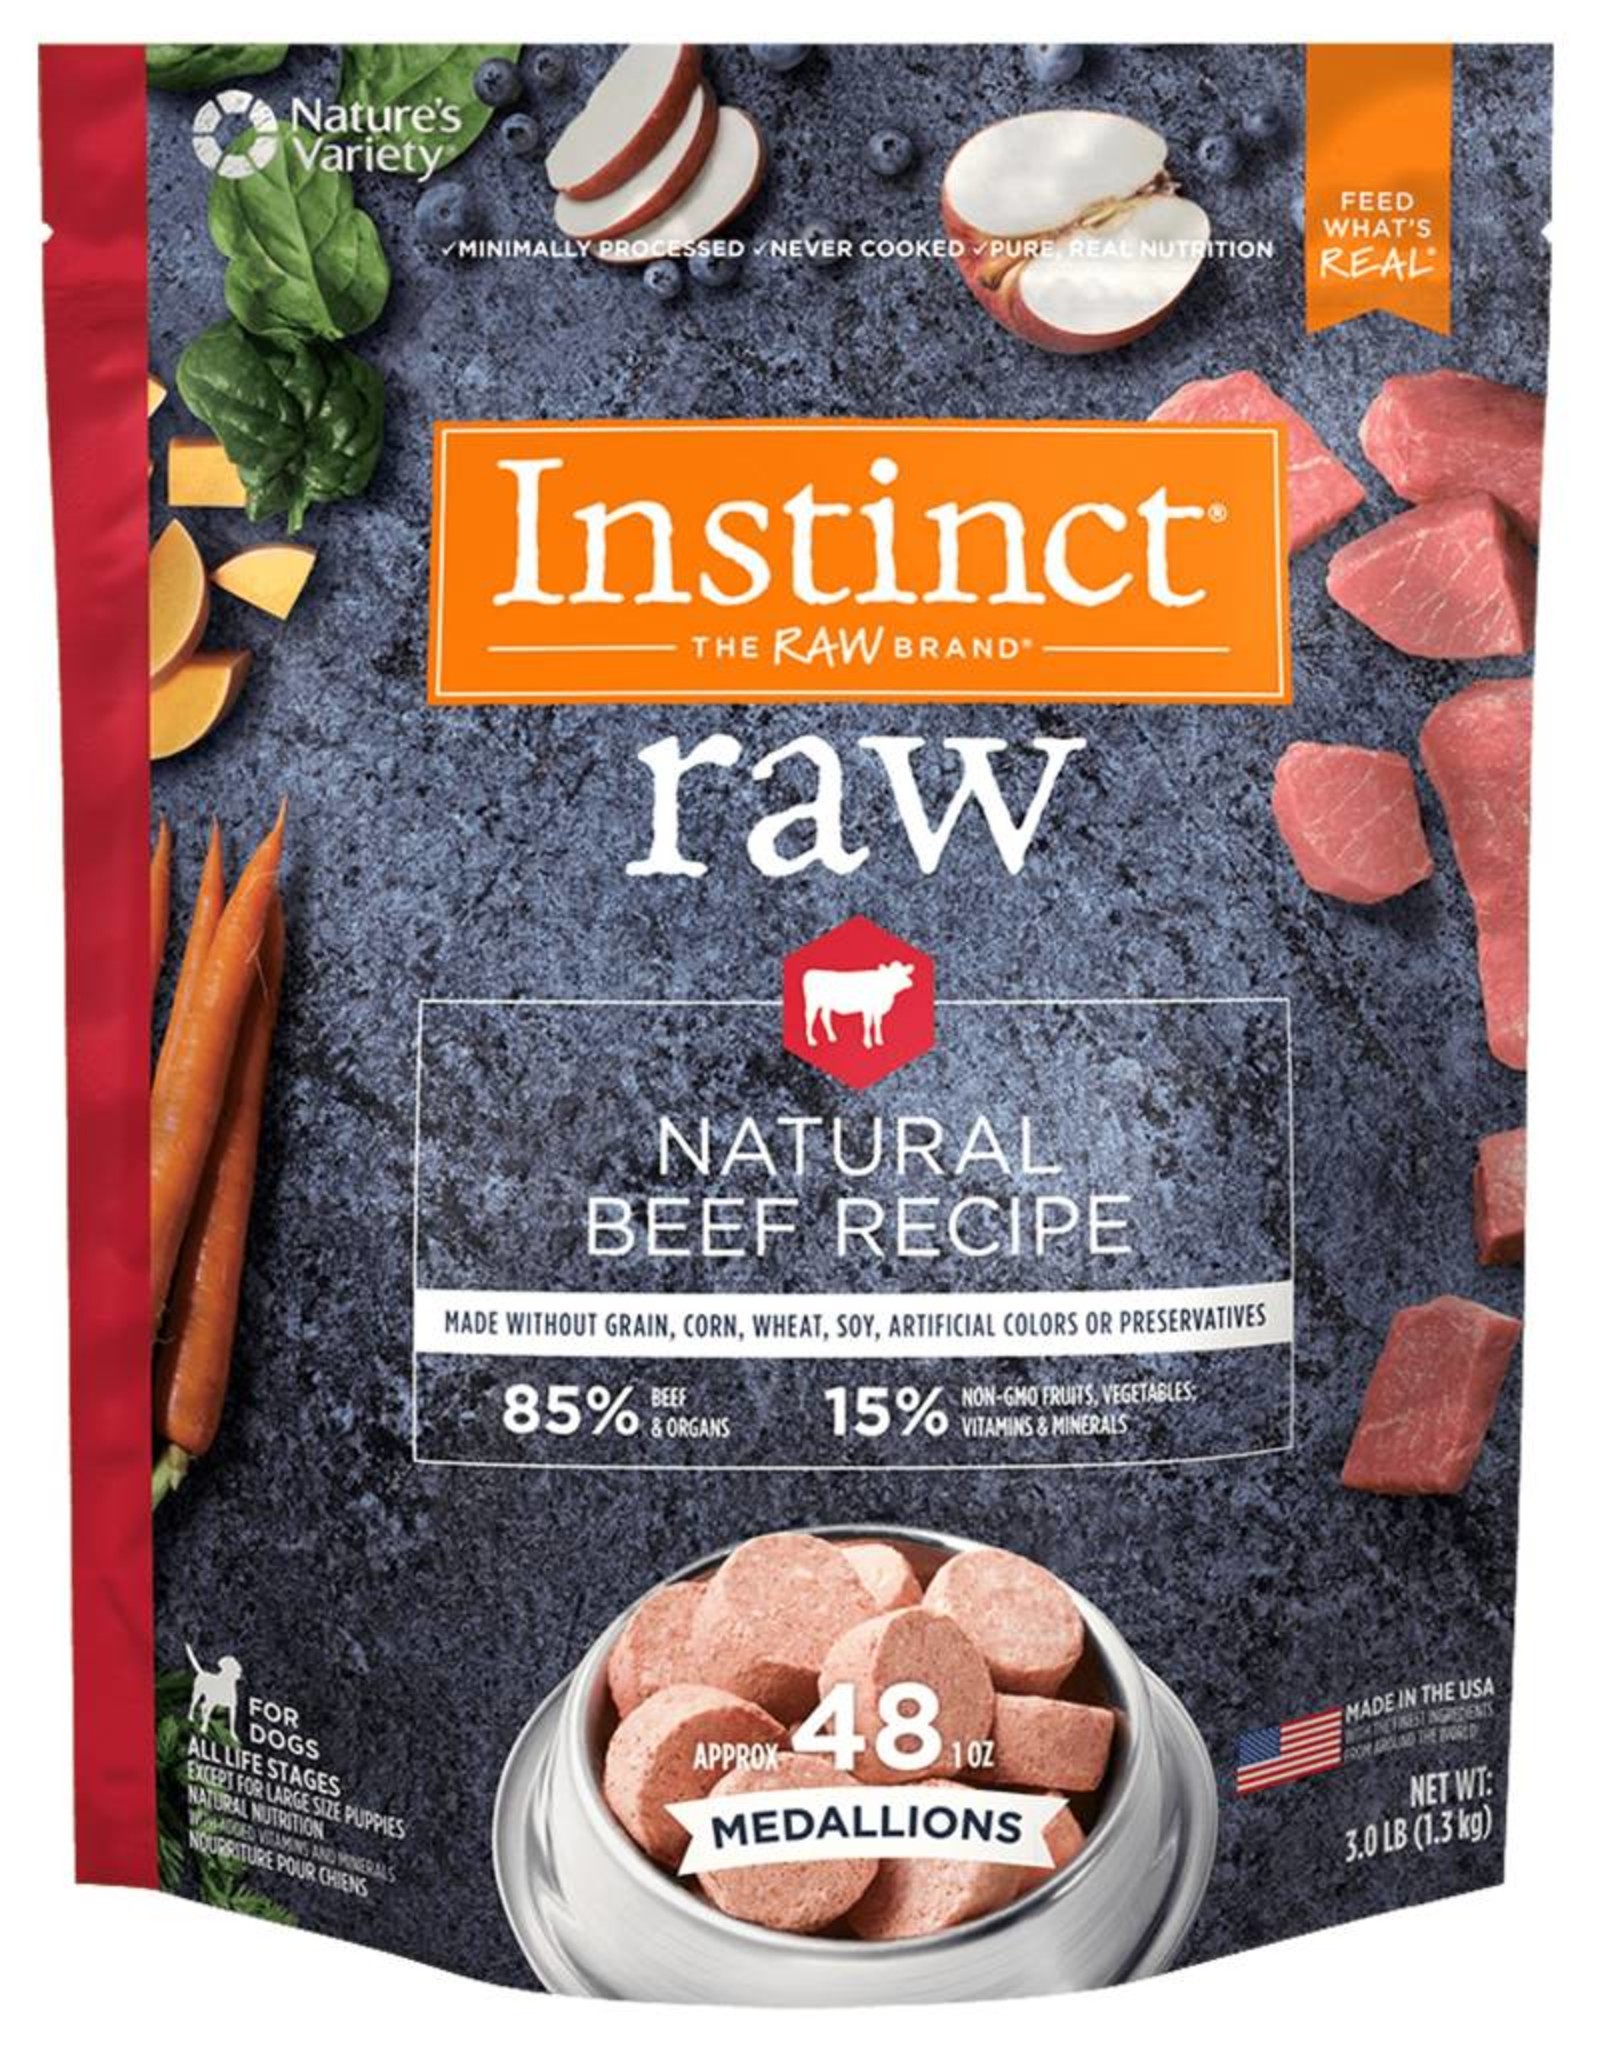 Nature's Variety Nature's Variety Instinct Frozen Raw Medallions Grain-Free Natural Beef Recipe Dog Food 3 lb